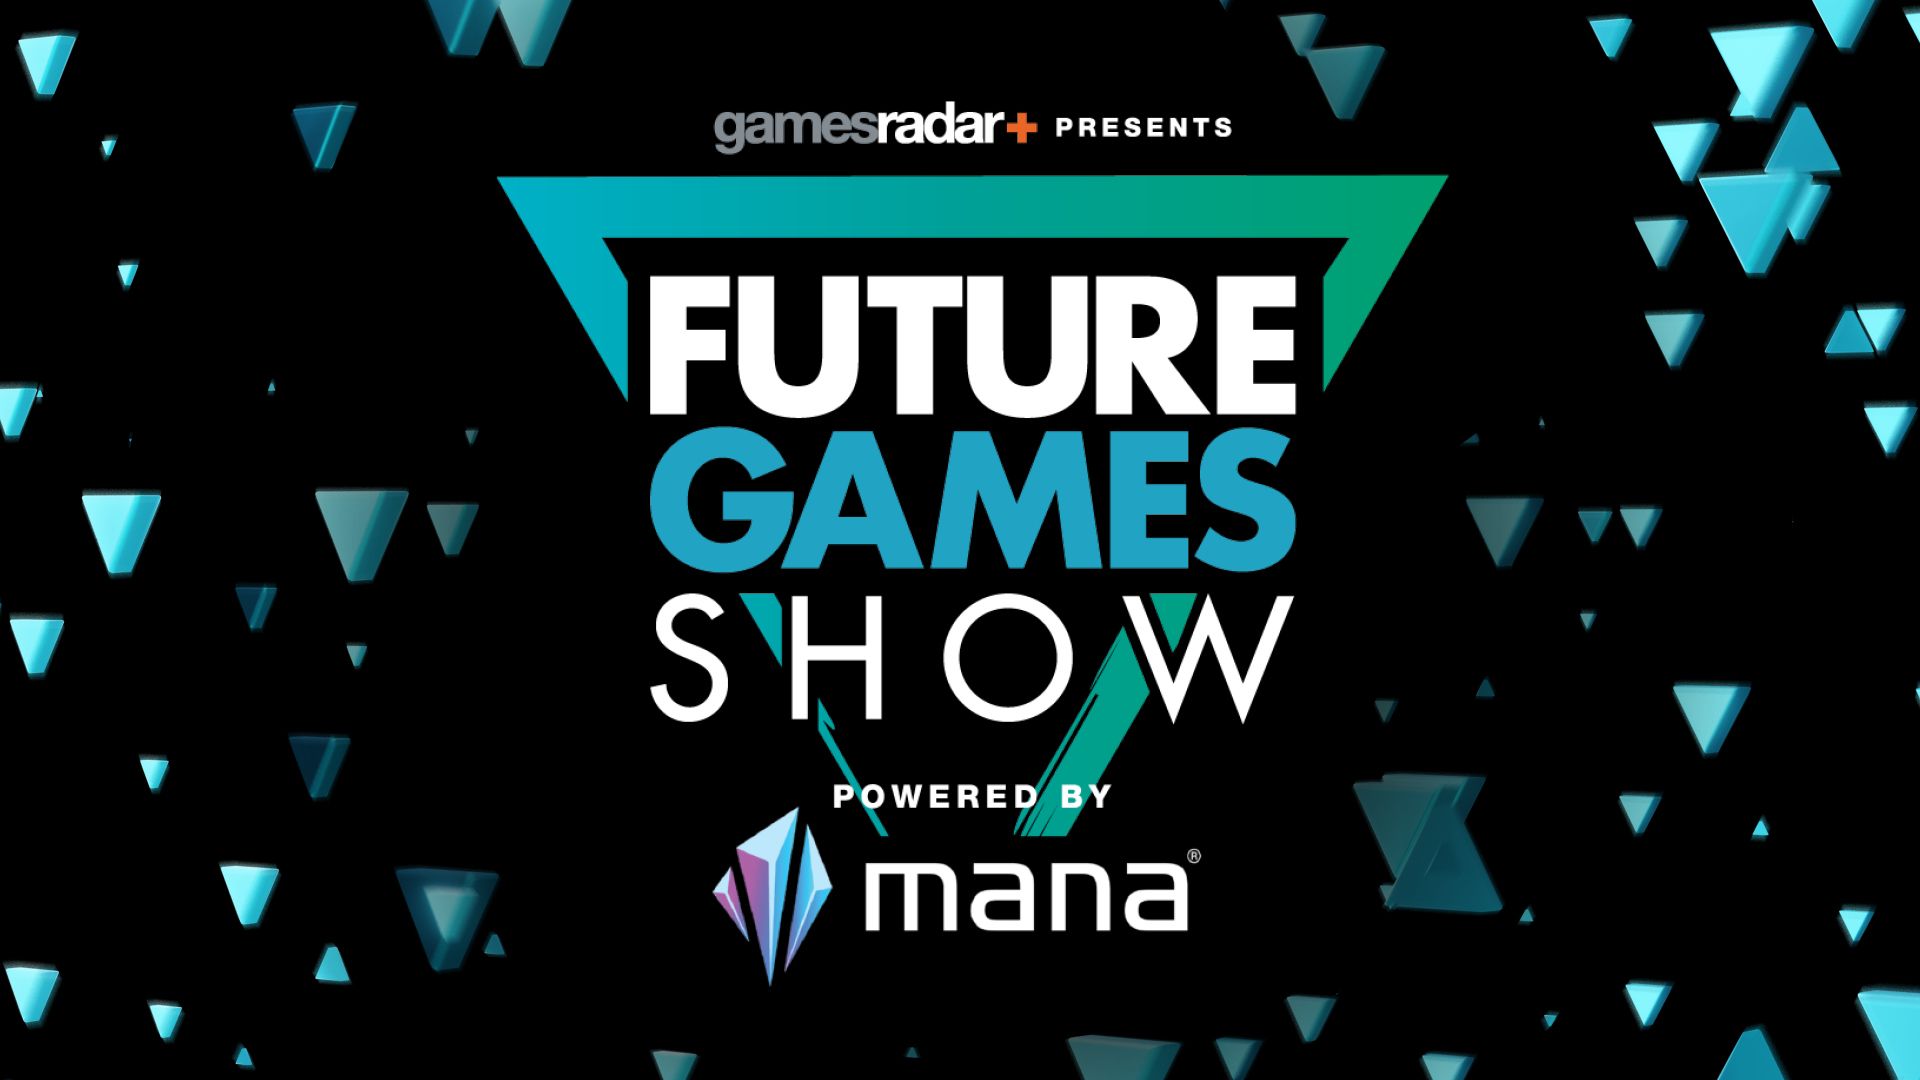 Everything Announced at the Future Games Show Powered by Mana